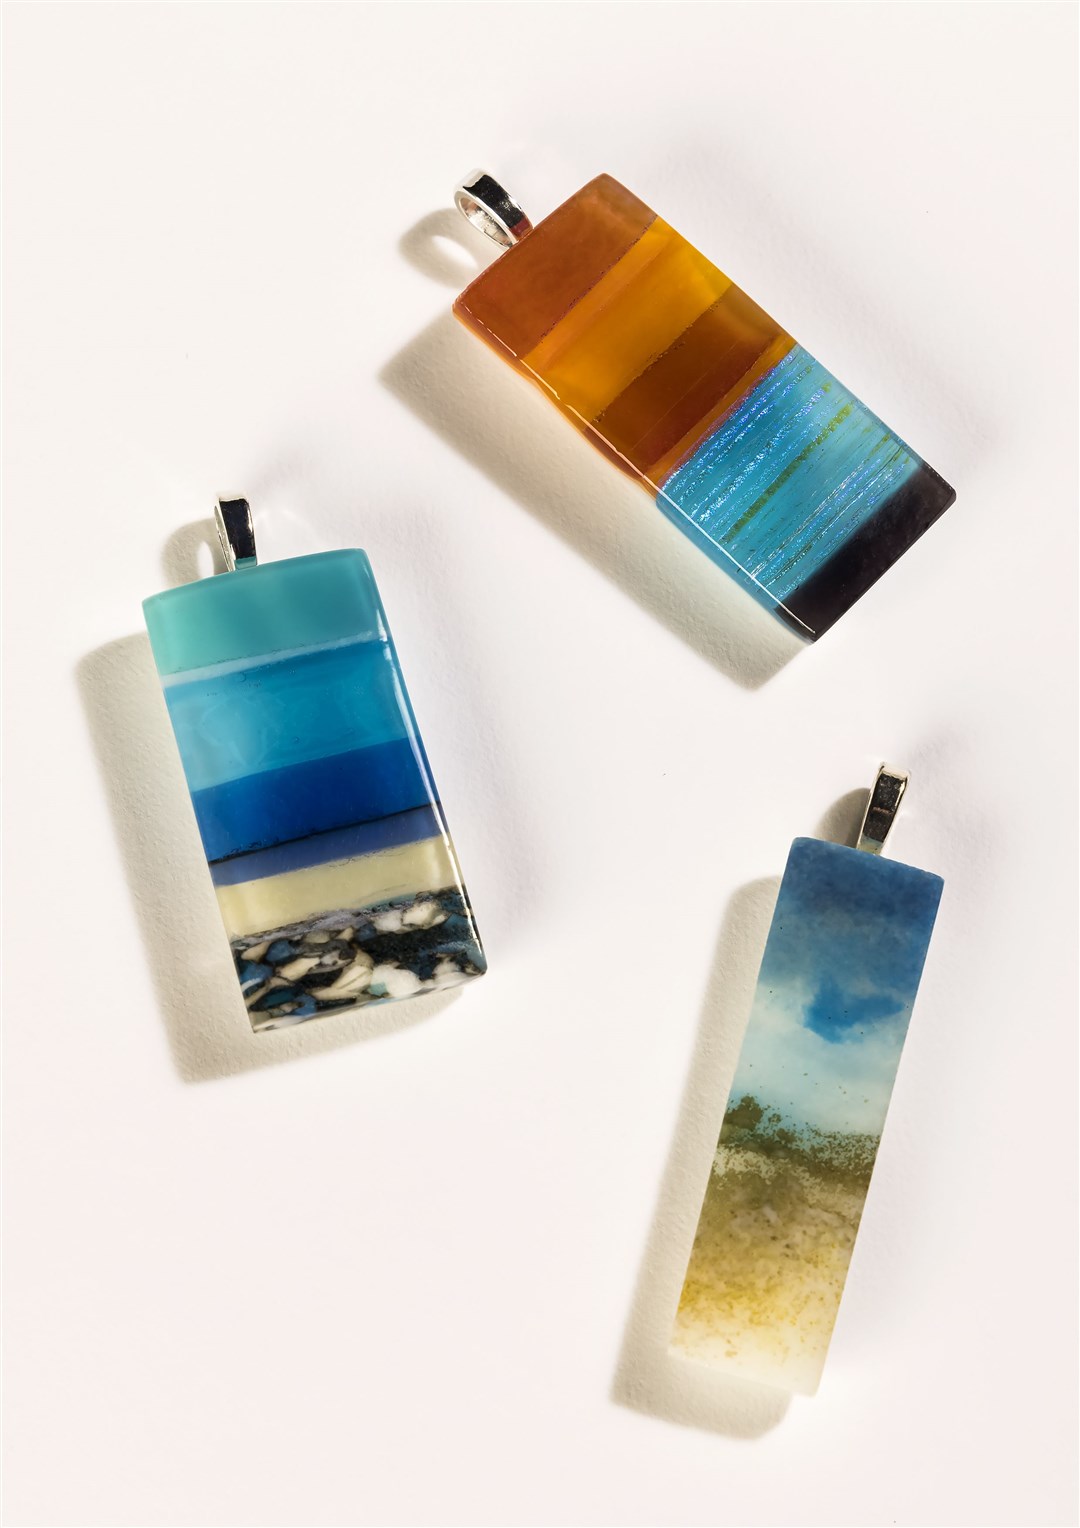 Some examples of Cromarty artist Emma Nightingale's glass designs.